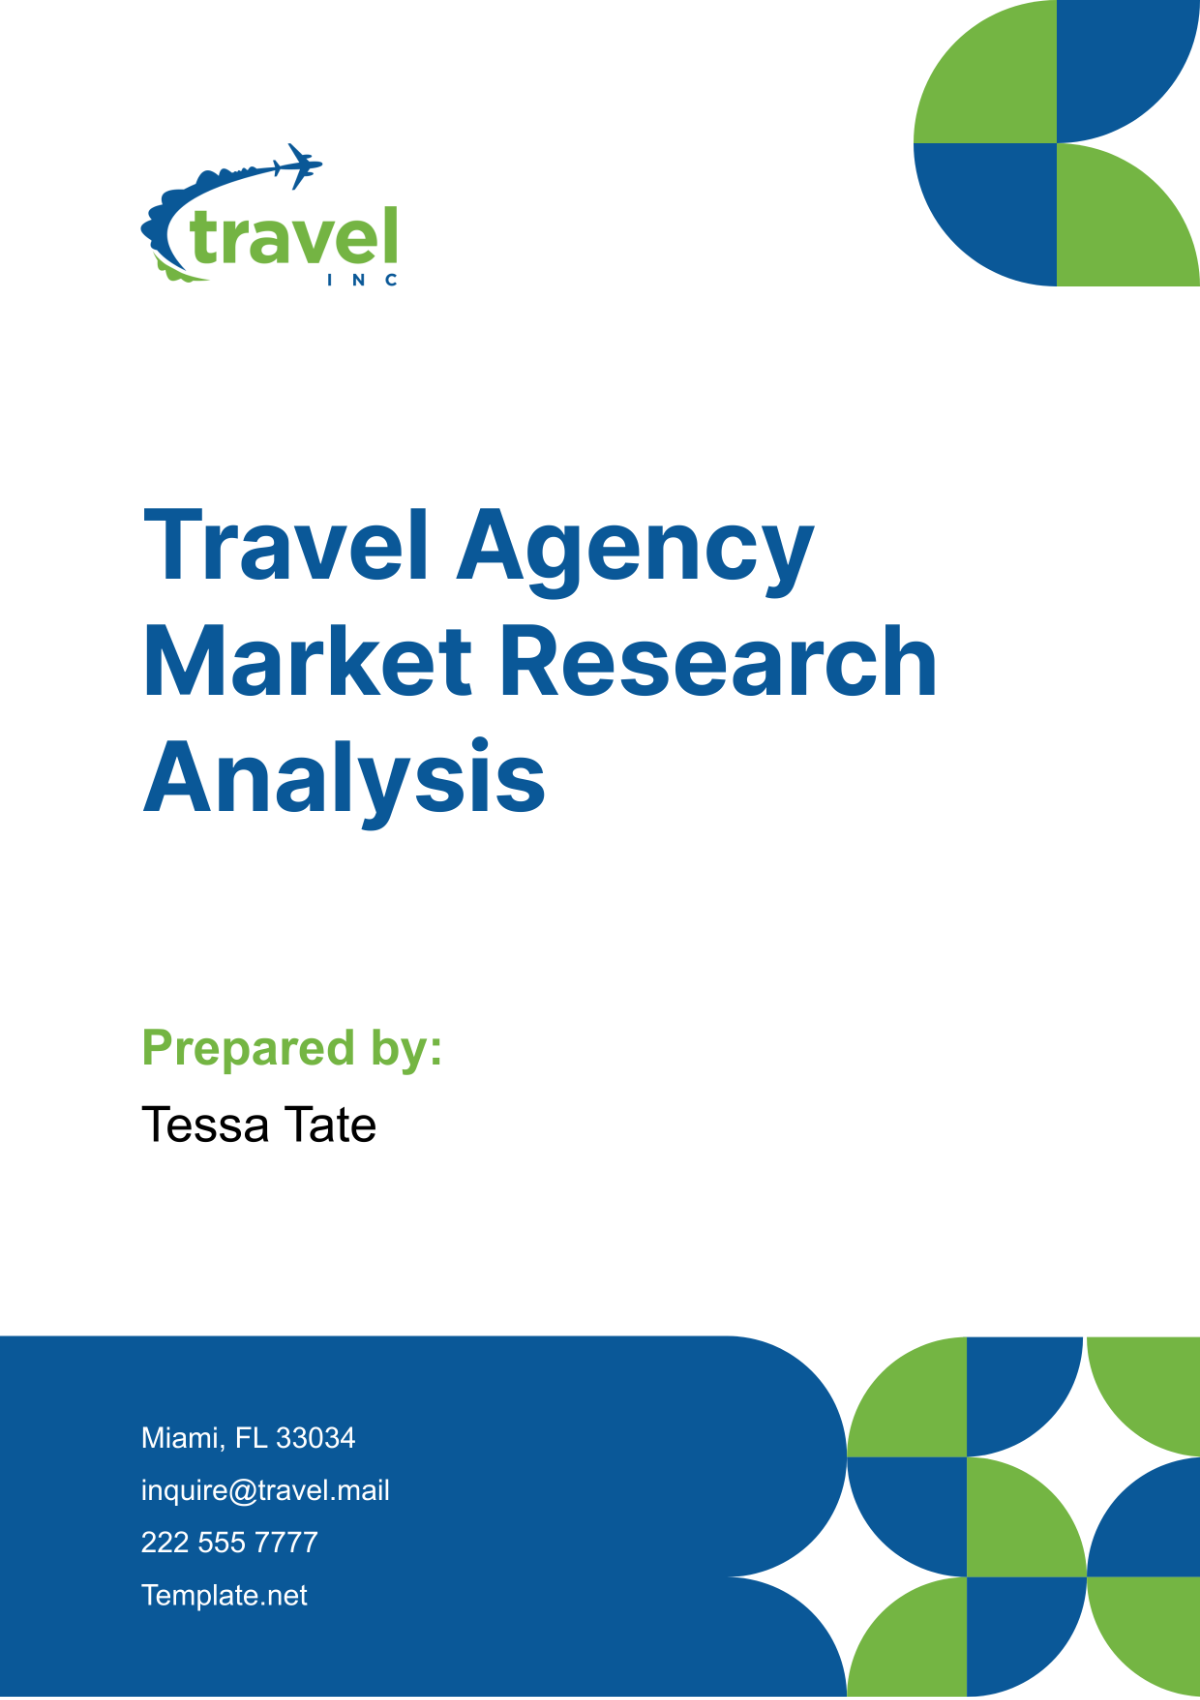 Travel Agency Market Research Analysis Template